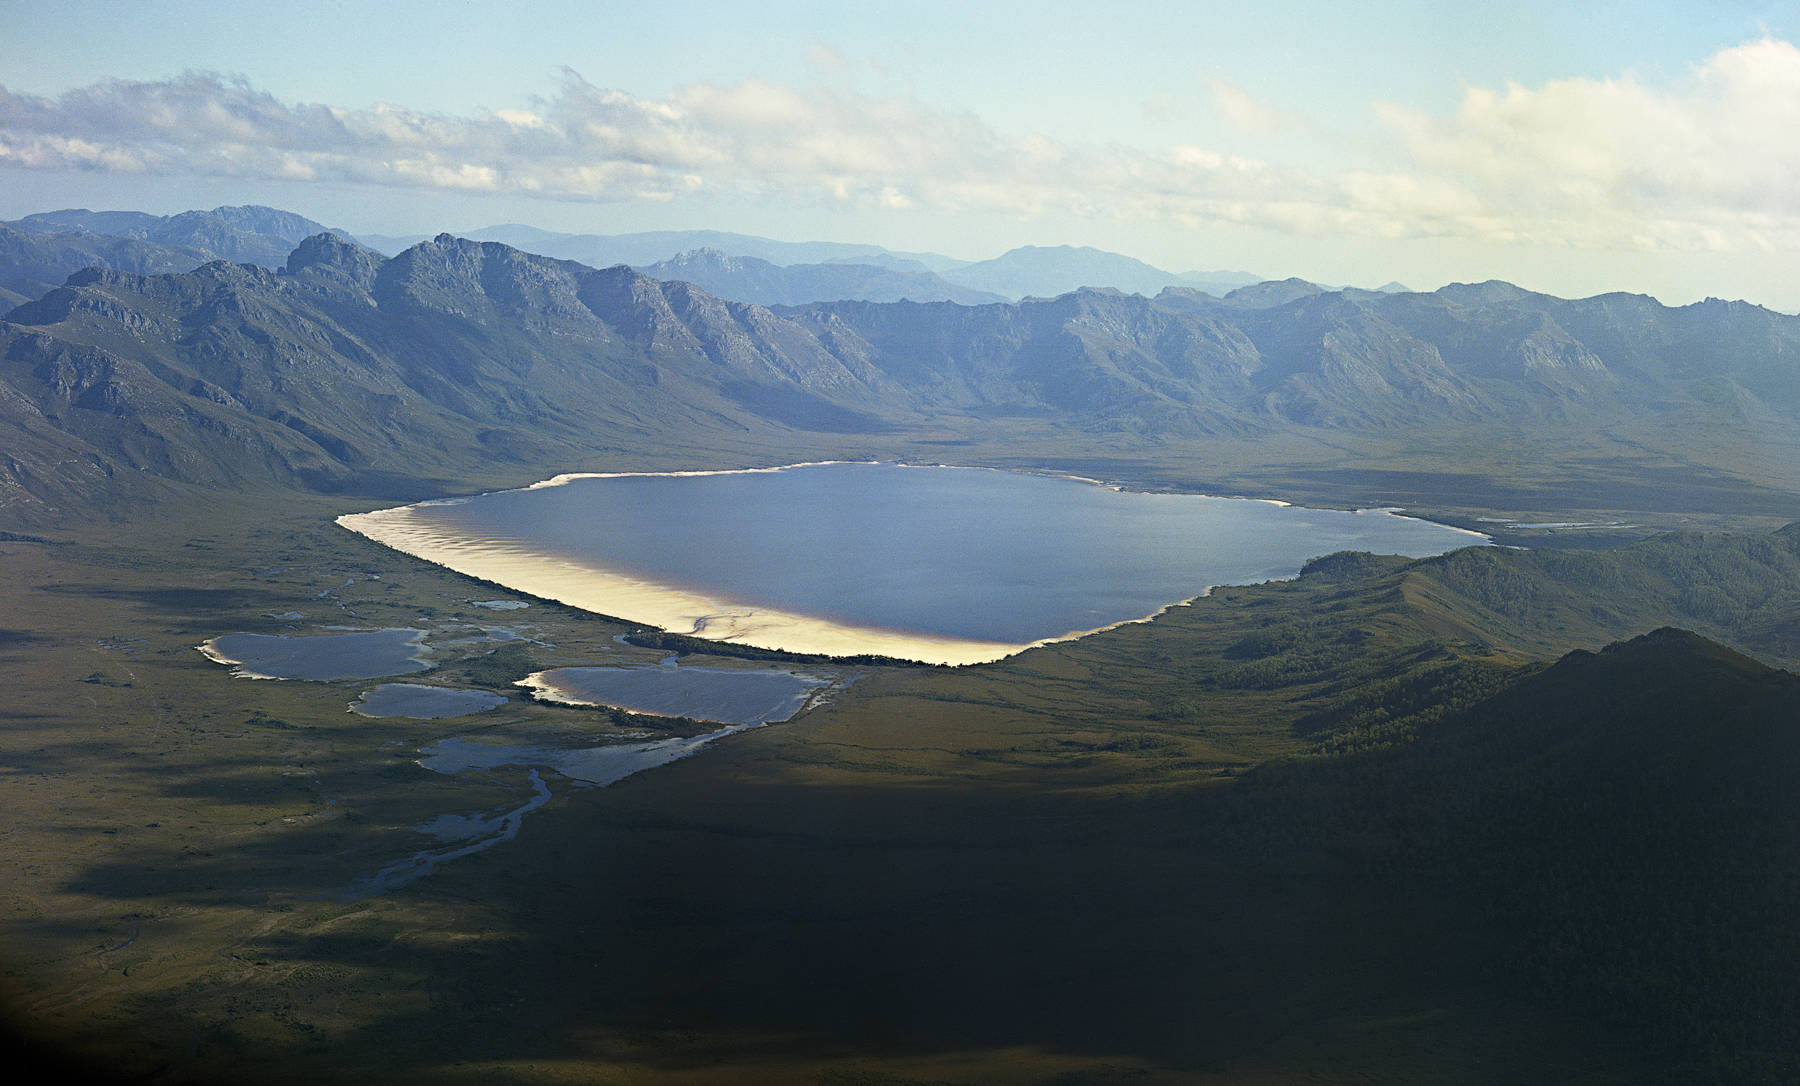 Photograph of the original Lake Pedder by Wilf Elvy taken from a light plane in 1972–73 prior to inundation by the Huon-Serpentine impoundment waters. The rugged Frankland Range is in the background and the three kilometre long, stunning pink quartzite beach sparkles in the foreground.